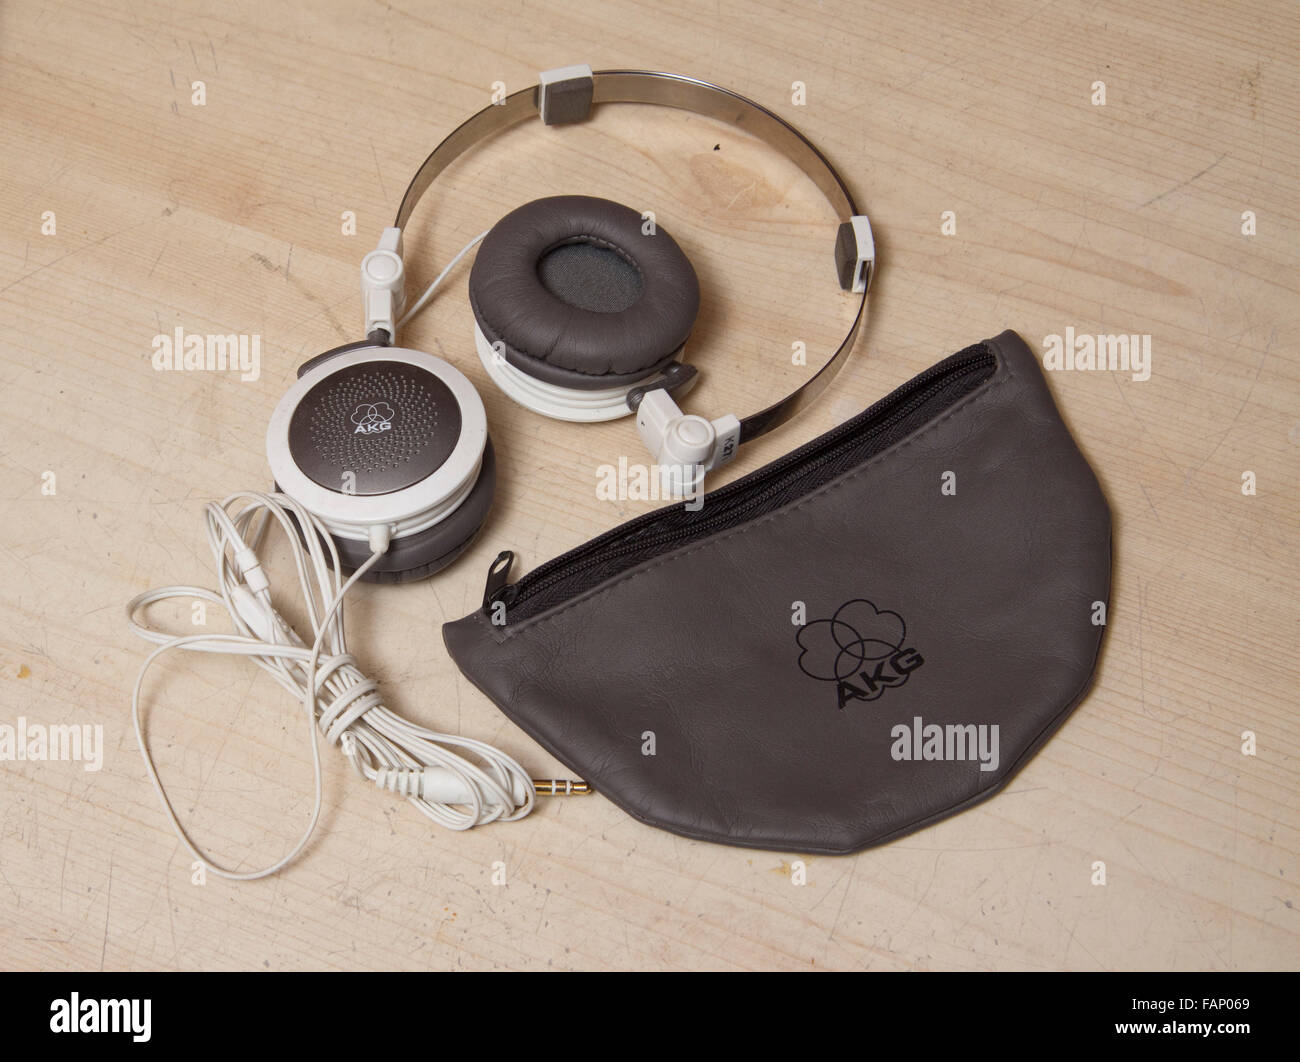 Pair of AKG K27i folding headphones with pouch Stock Photo - Alamy